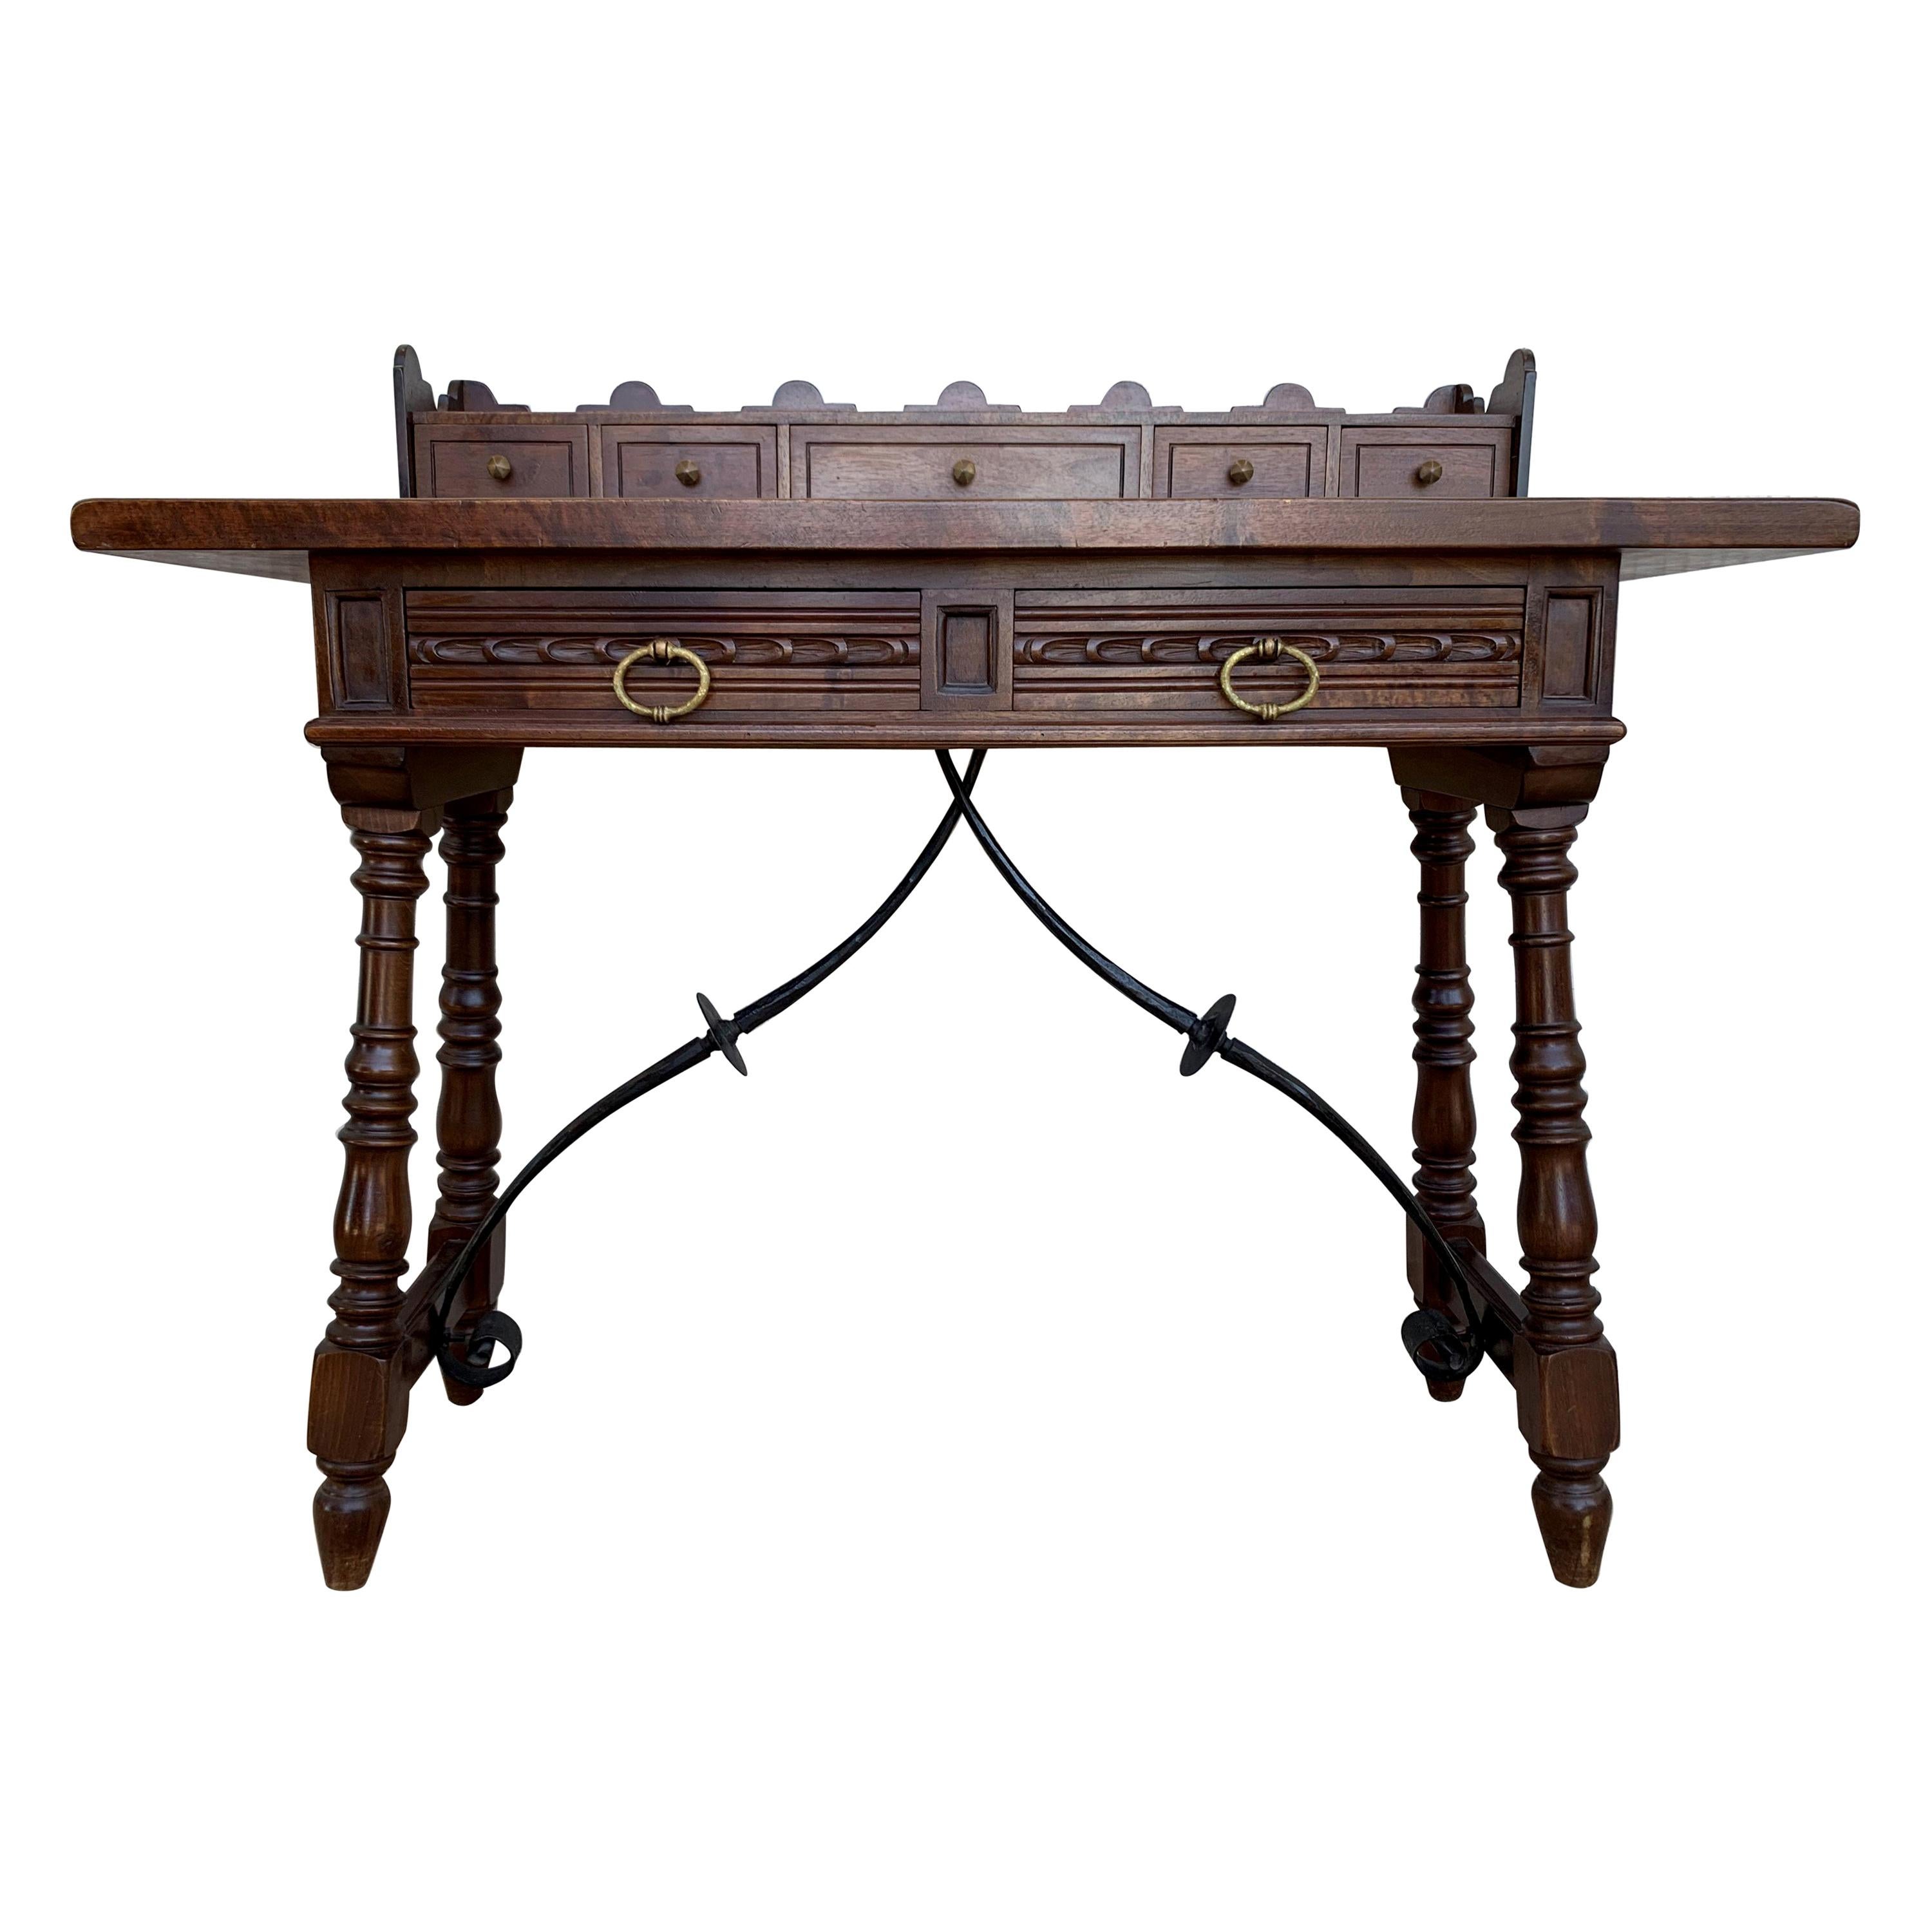 Catalan Spanish Lady Desk or Console Table in Carved Walnut and Iron Stretcher